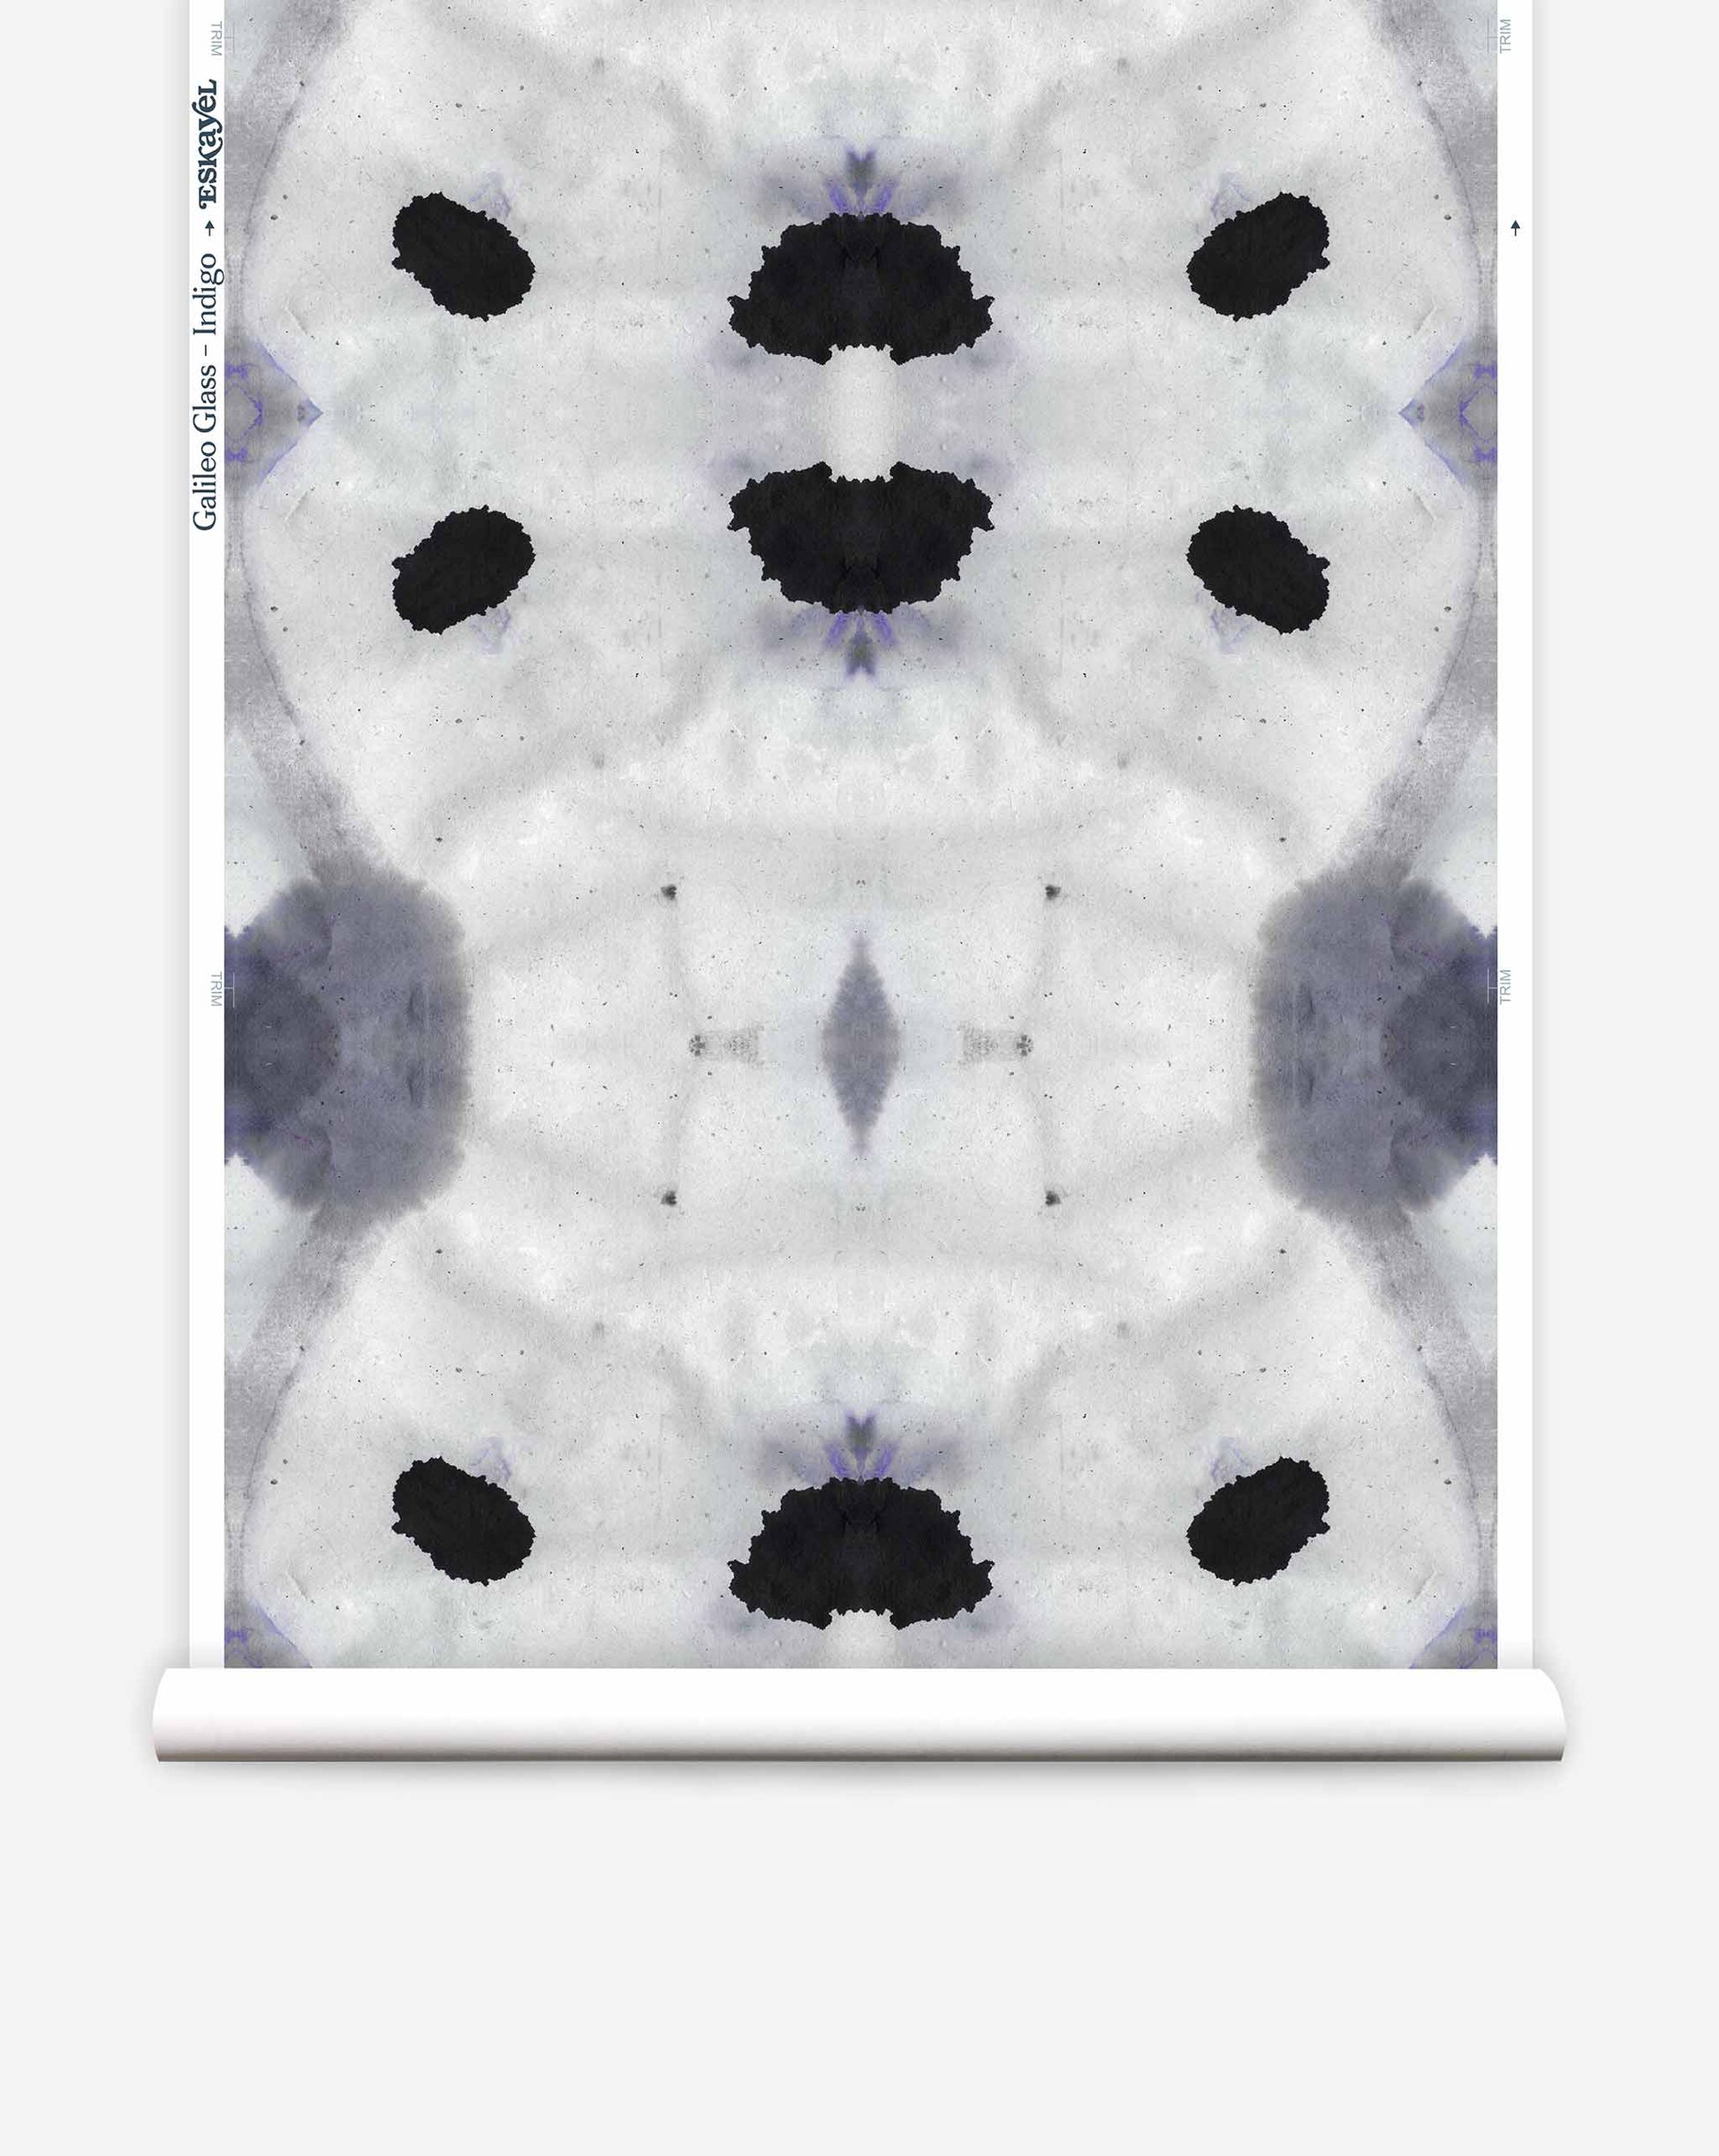 An inkblot test pattern with symmetrical dark shapes in an Indigo colorway on a white background.